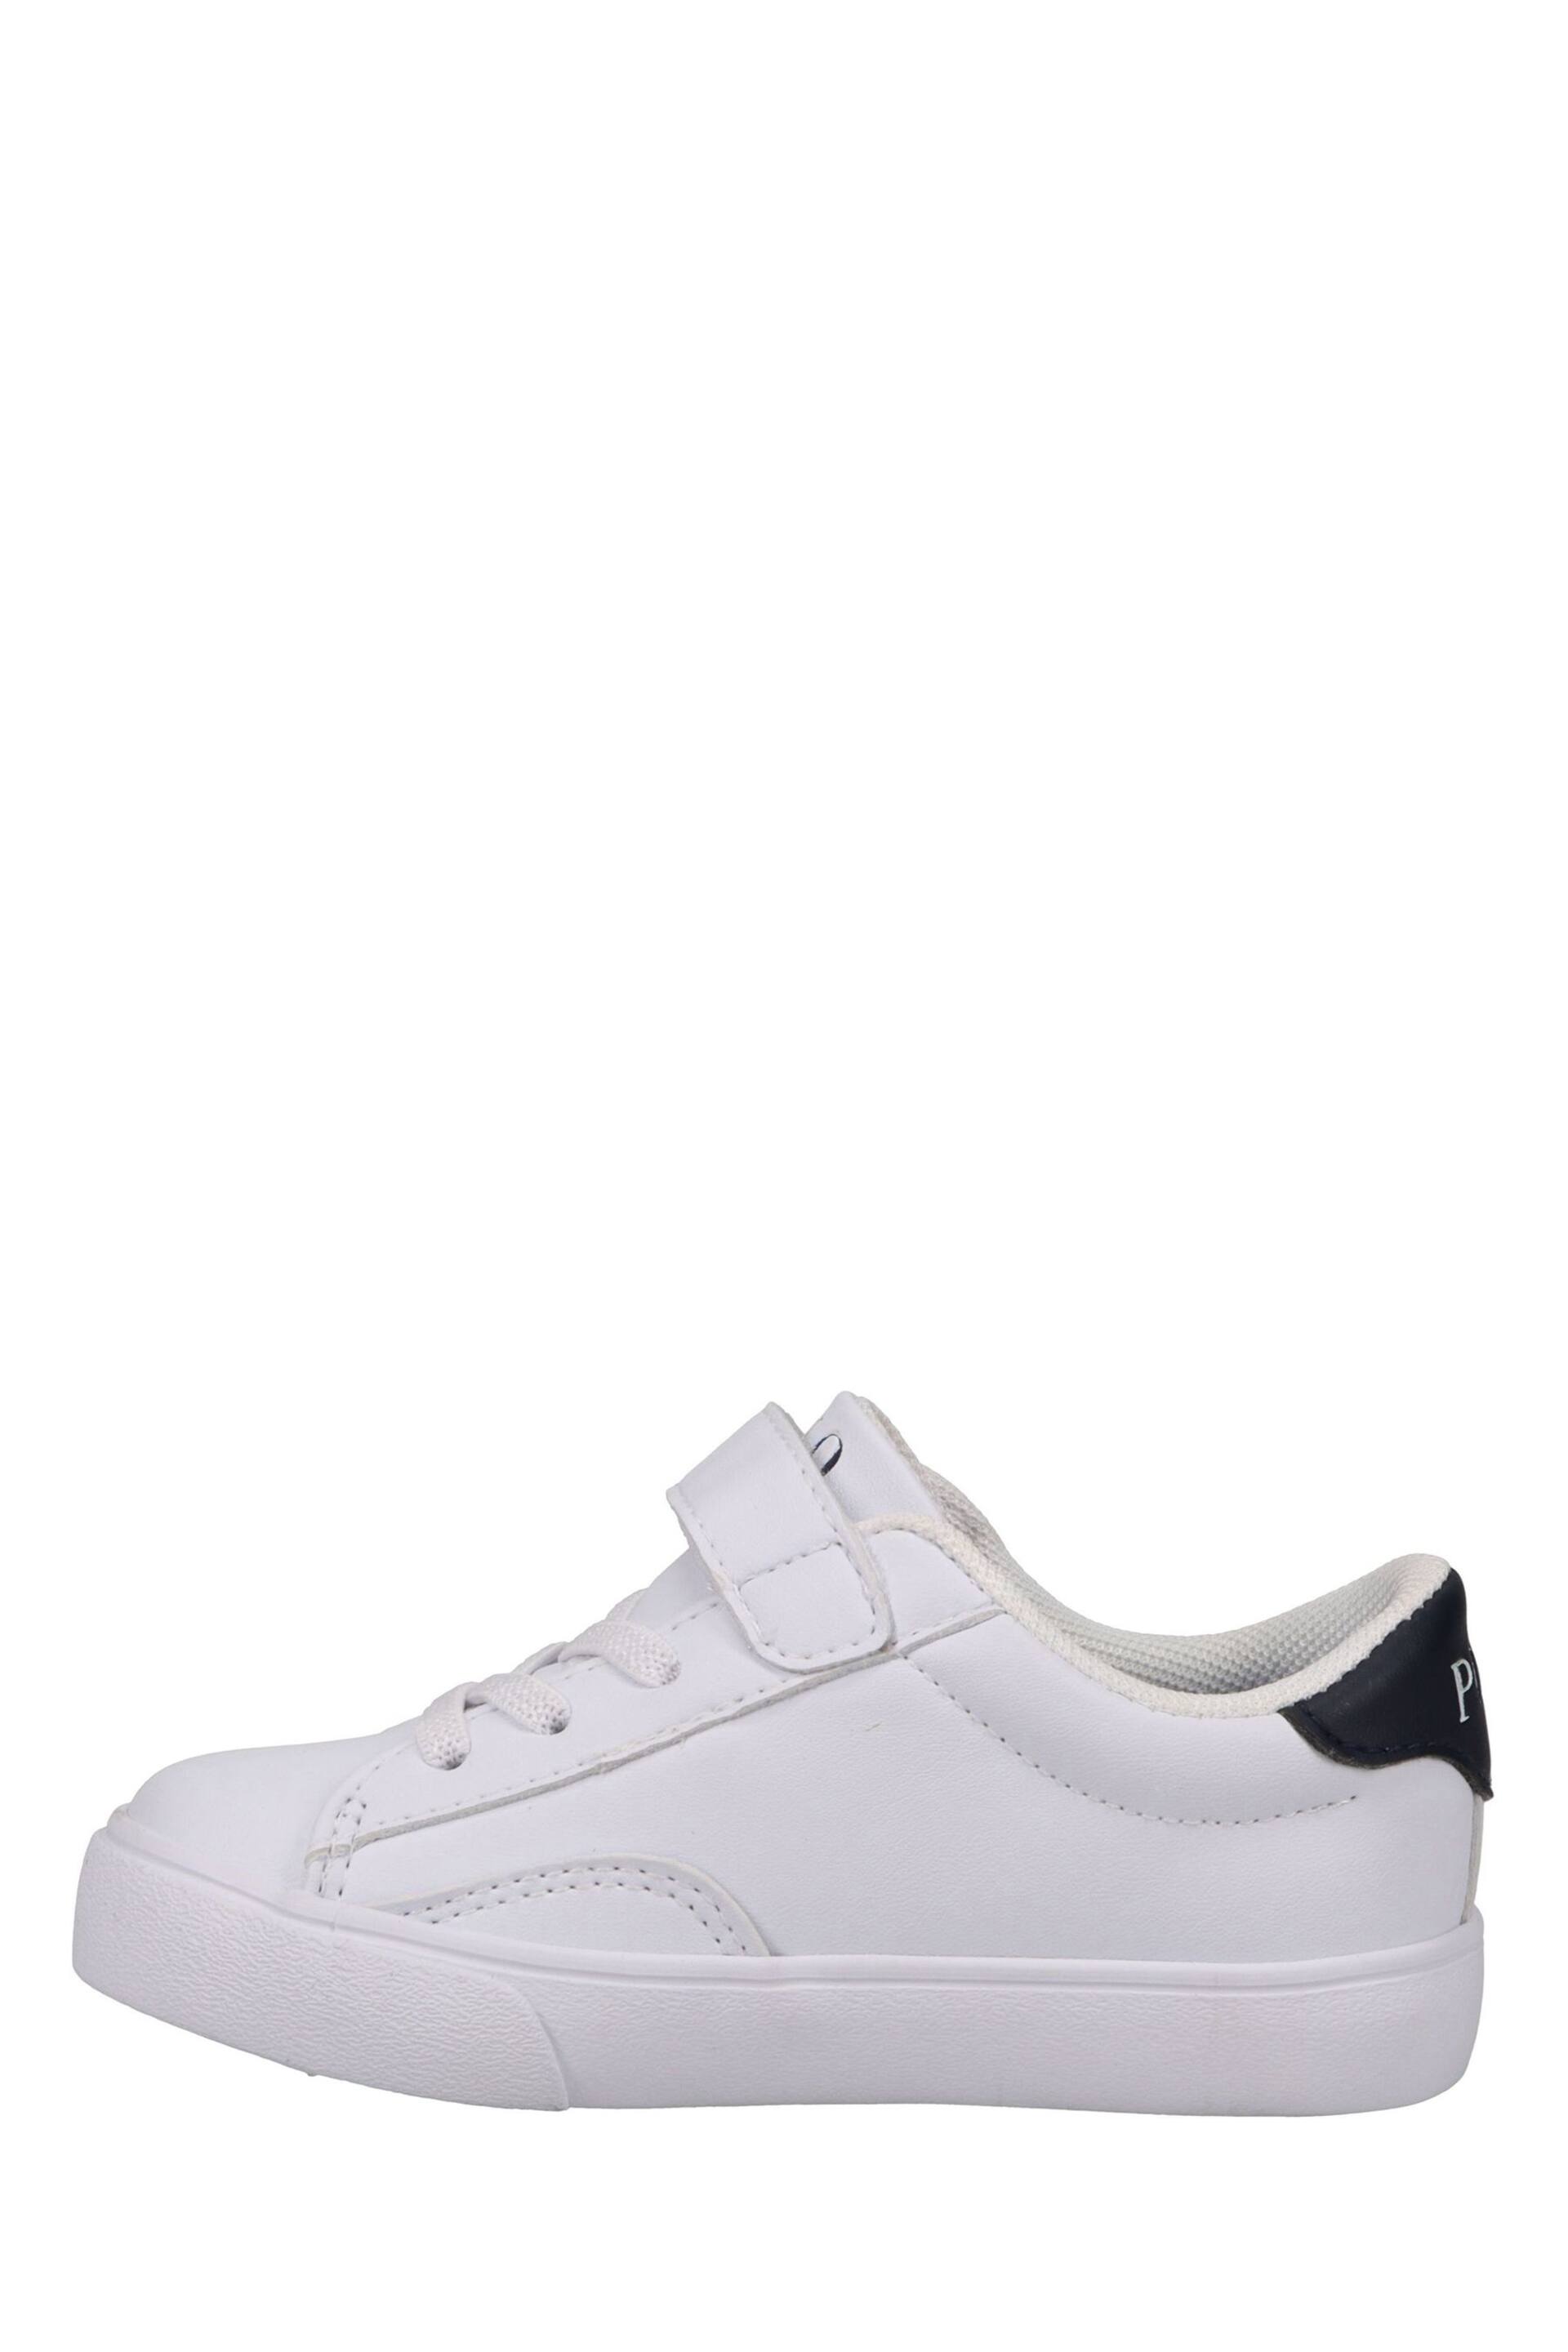 Polo Ralph Lauren Theron V Velcro Logo Trainers - Image 2 of 5